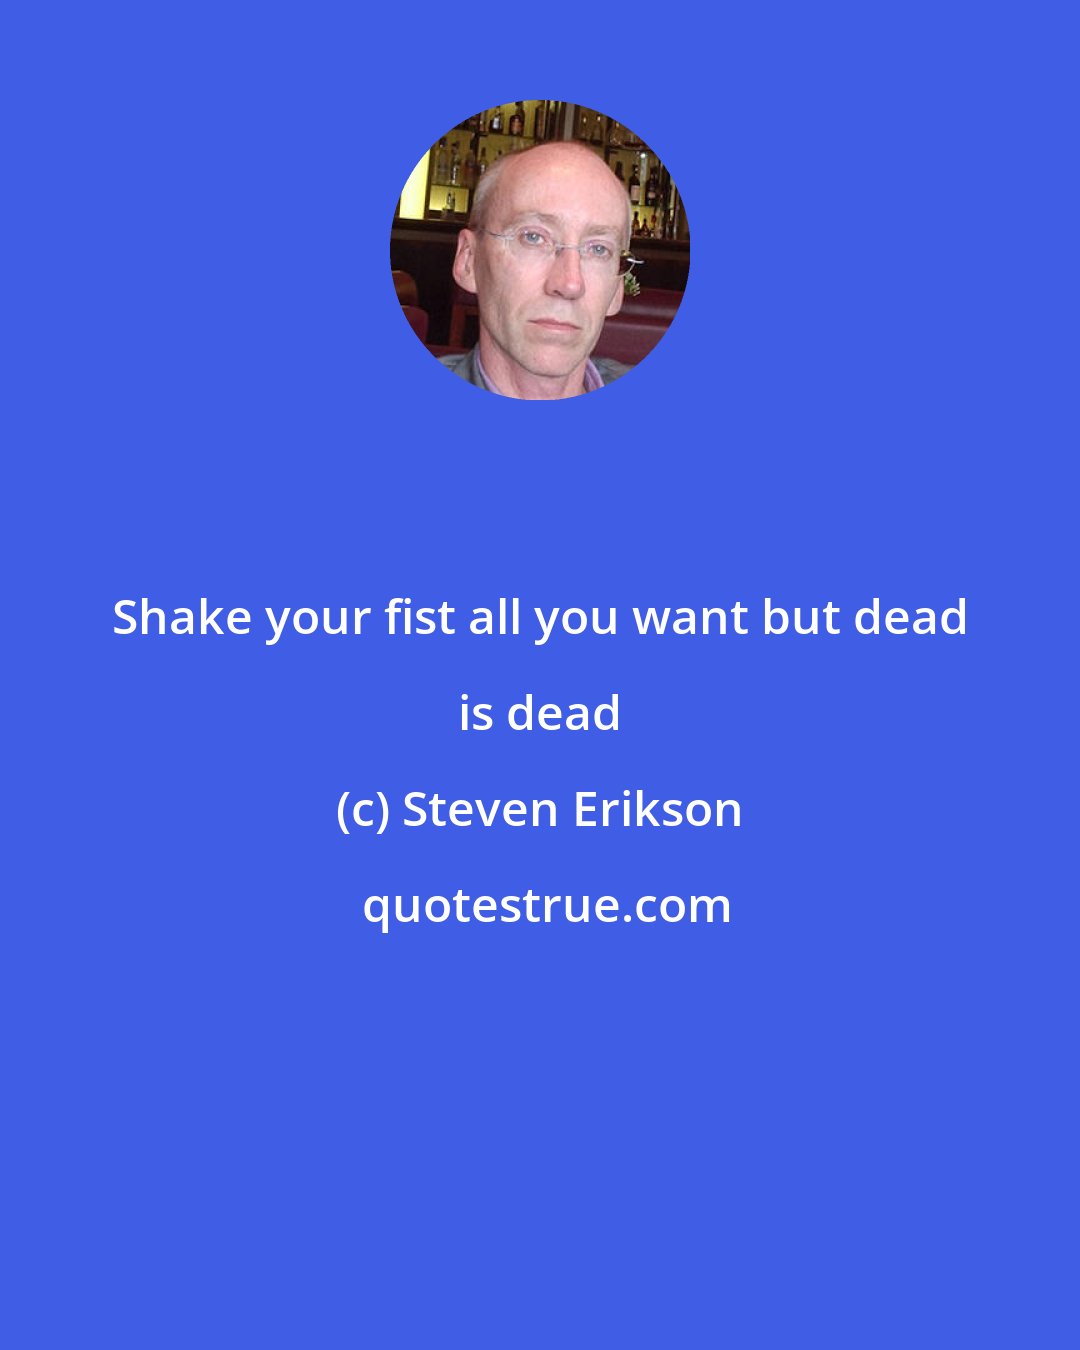 Steven Erikson: Shake your fist all you want but dead is dead